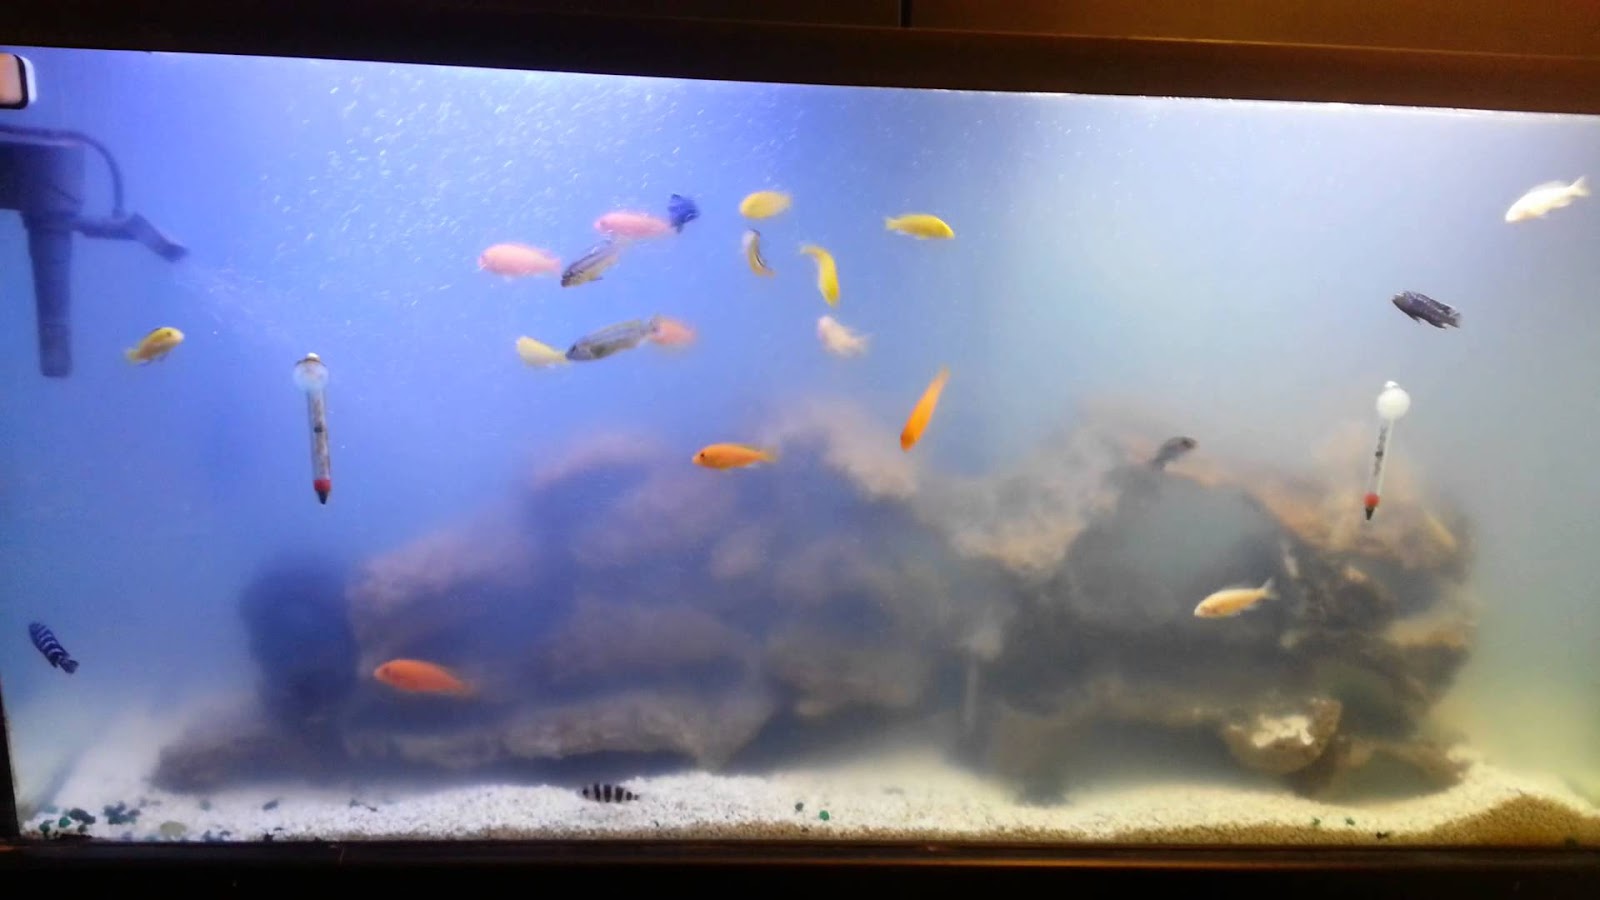 Fish Tank Bacteria Bloom White Bloom bacterial advice need been weeks over comments aquariums